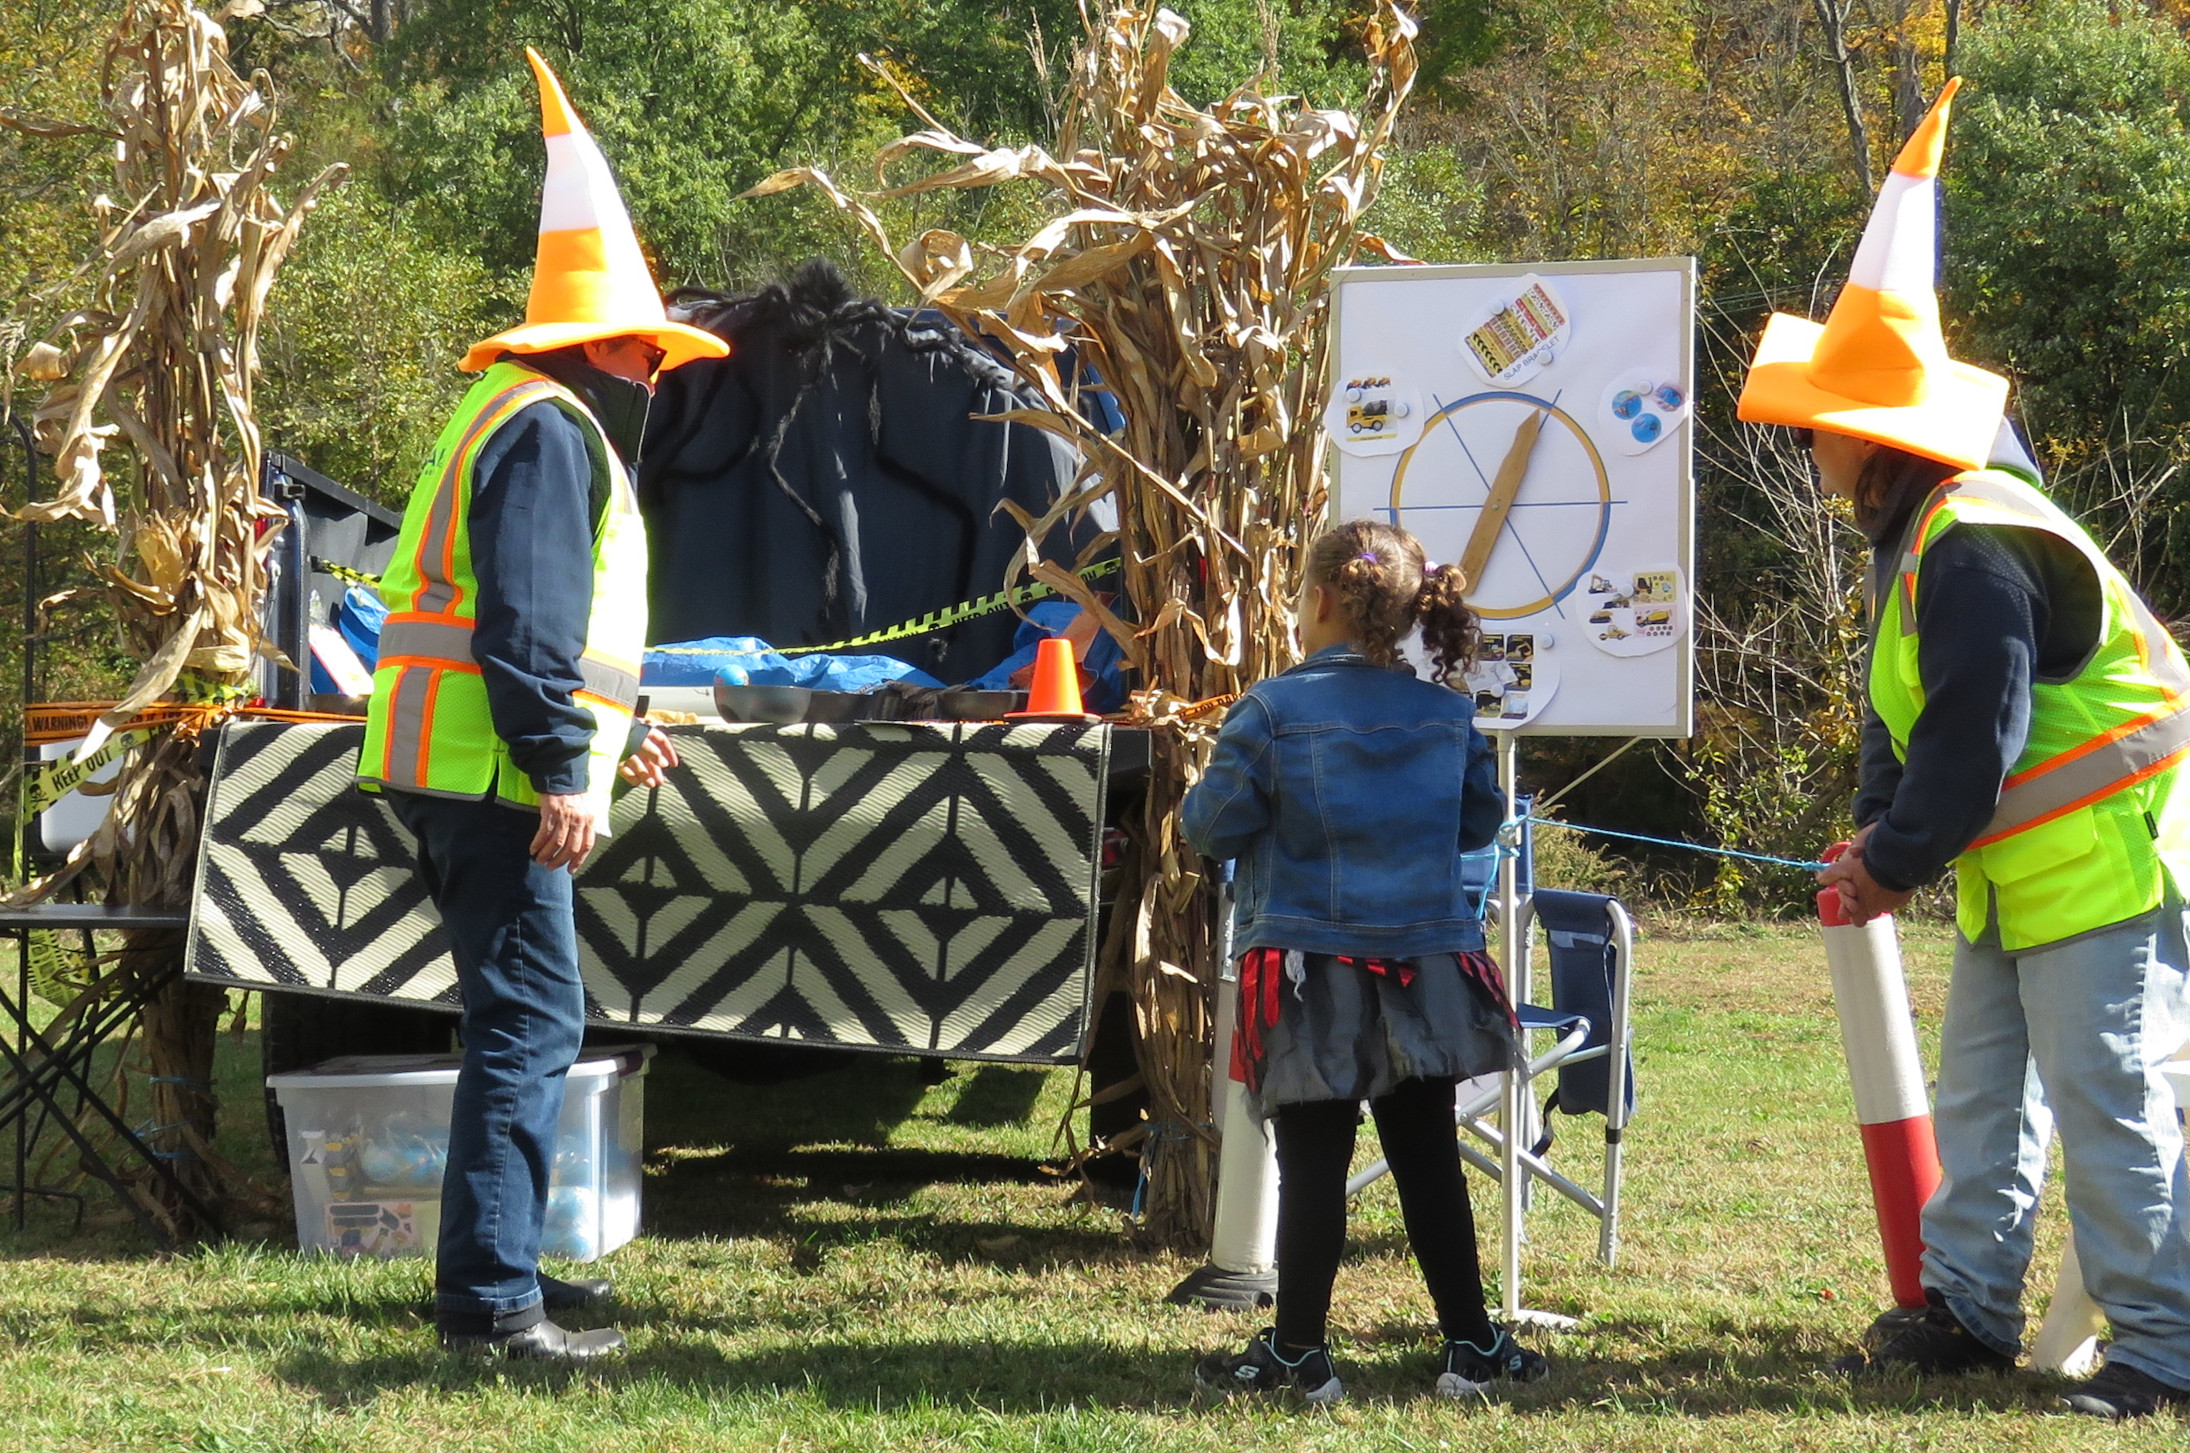 Missed Lower Frederick's Trunk Or Treat? A Photo Review